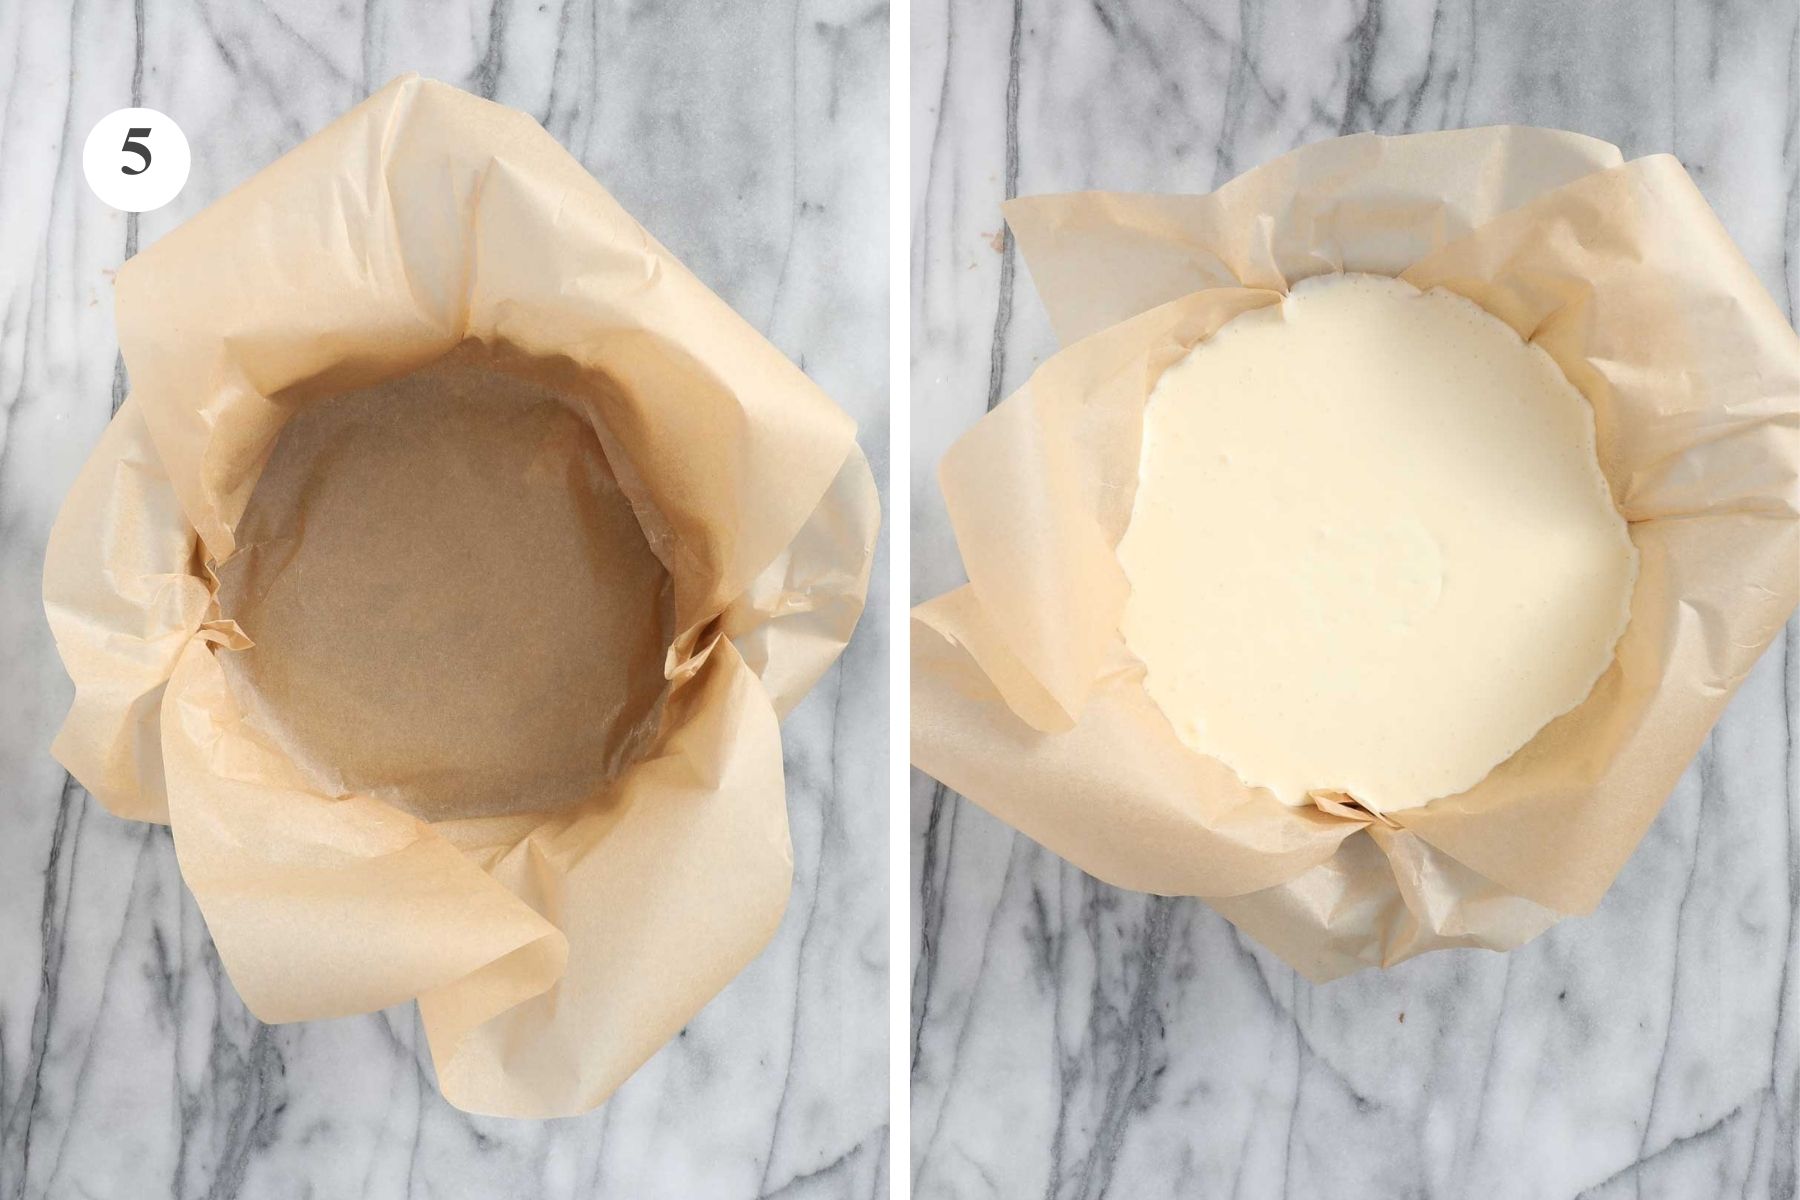 Round baking dish lined with parchment paper next to dish filled with cheesecake batter.